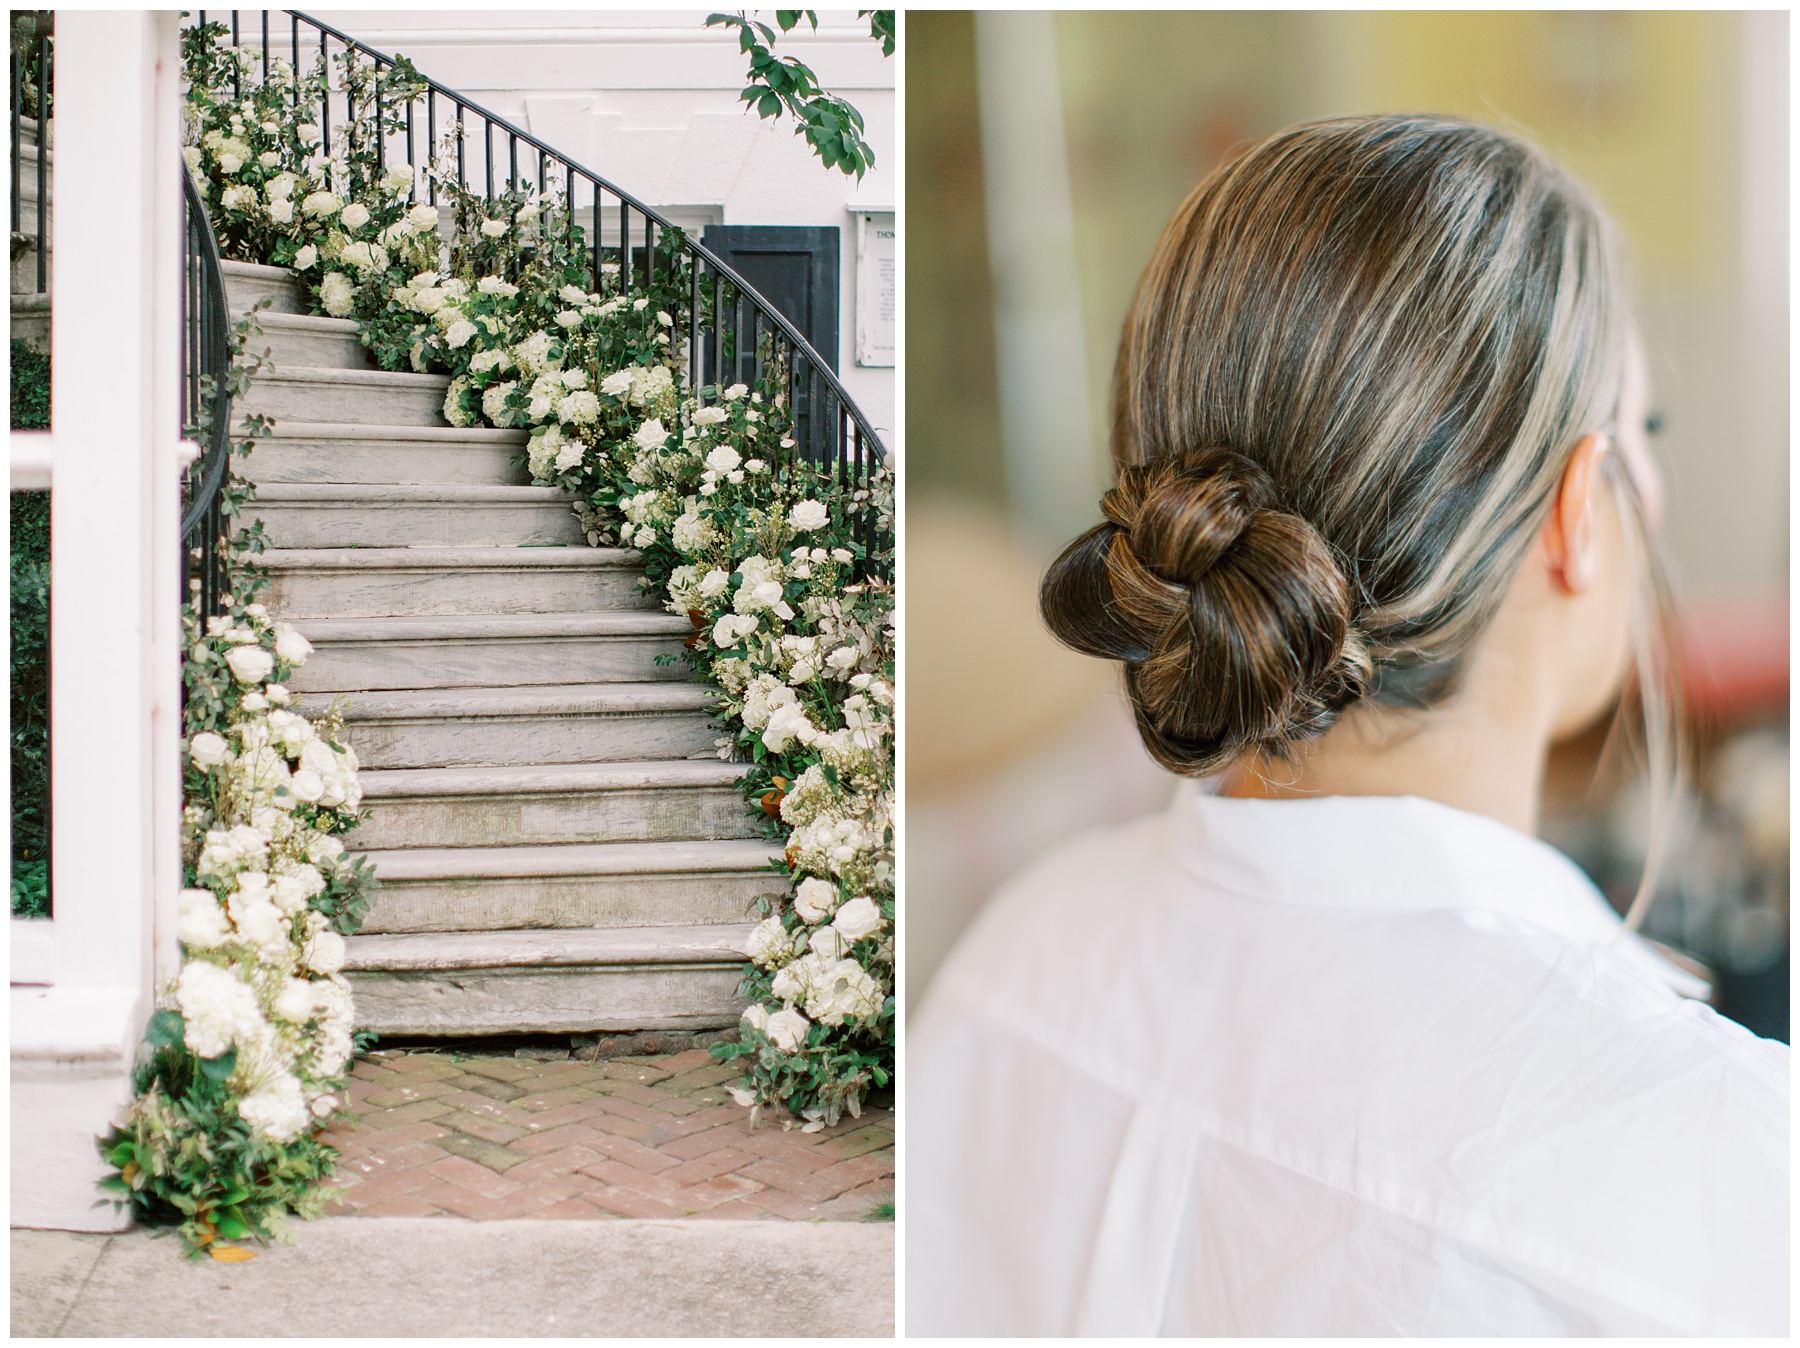 staircase lined in ivory flowers at the Governor Thomas Bennett House and bride's classic updo for Charleston wedding day 